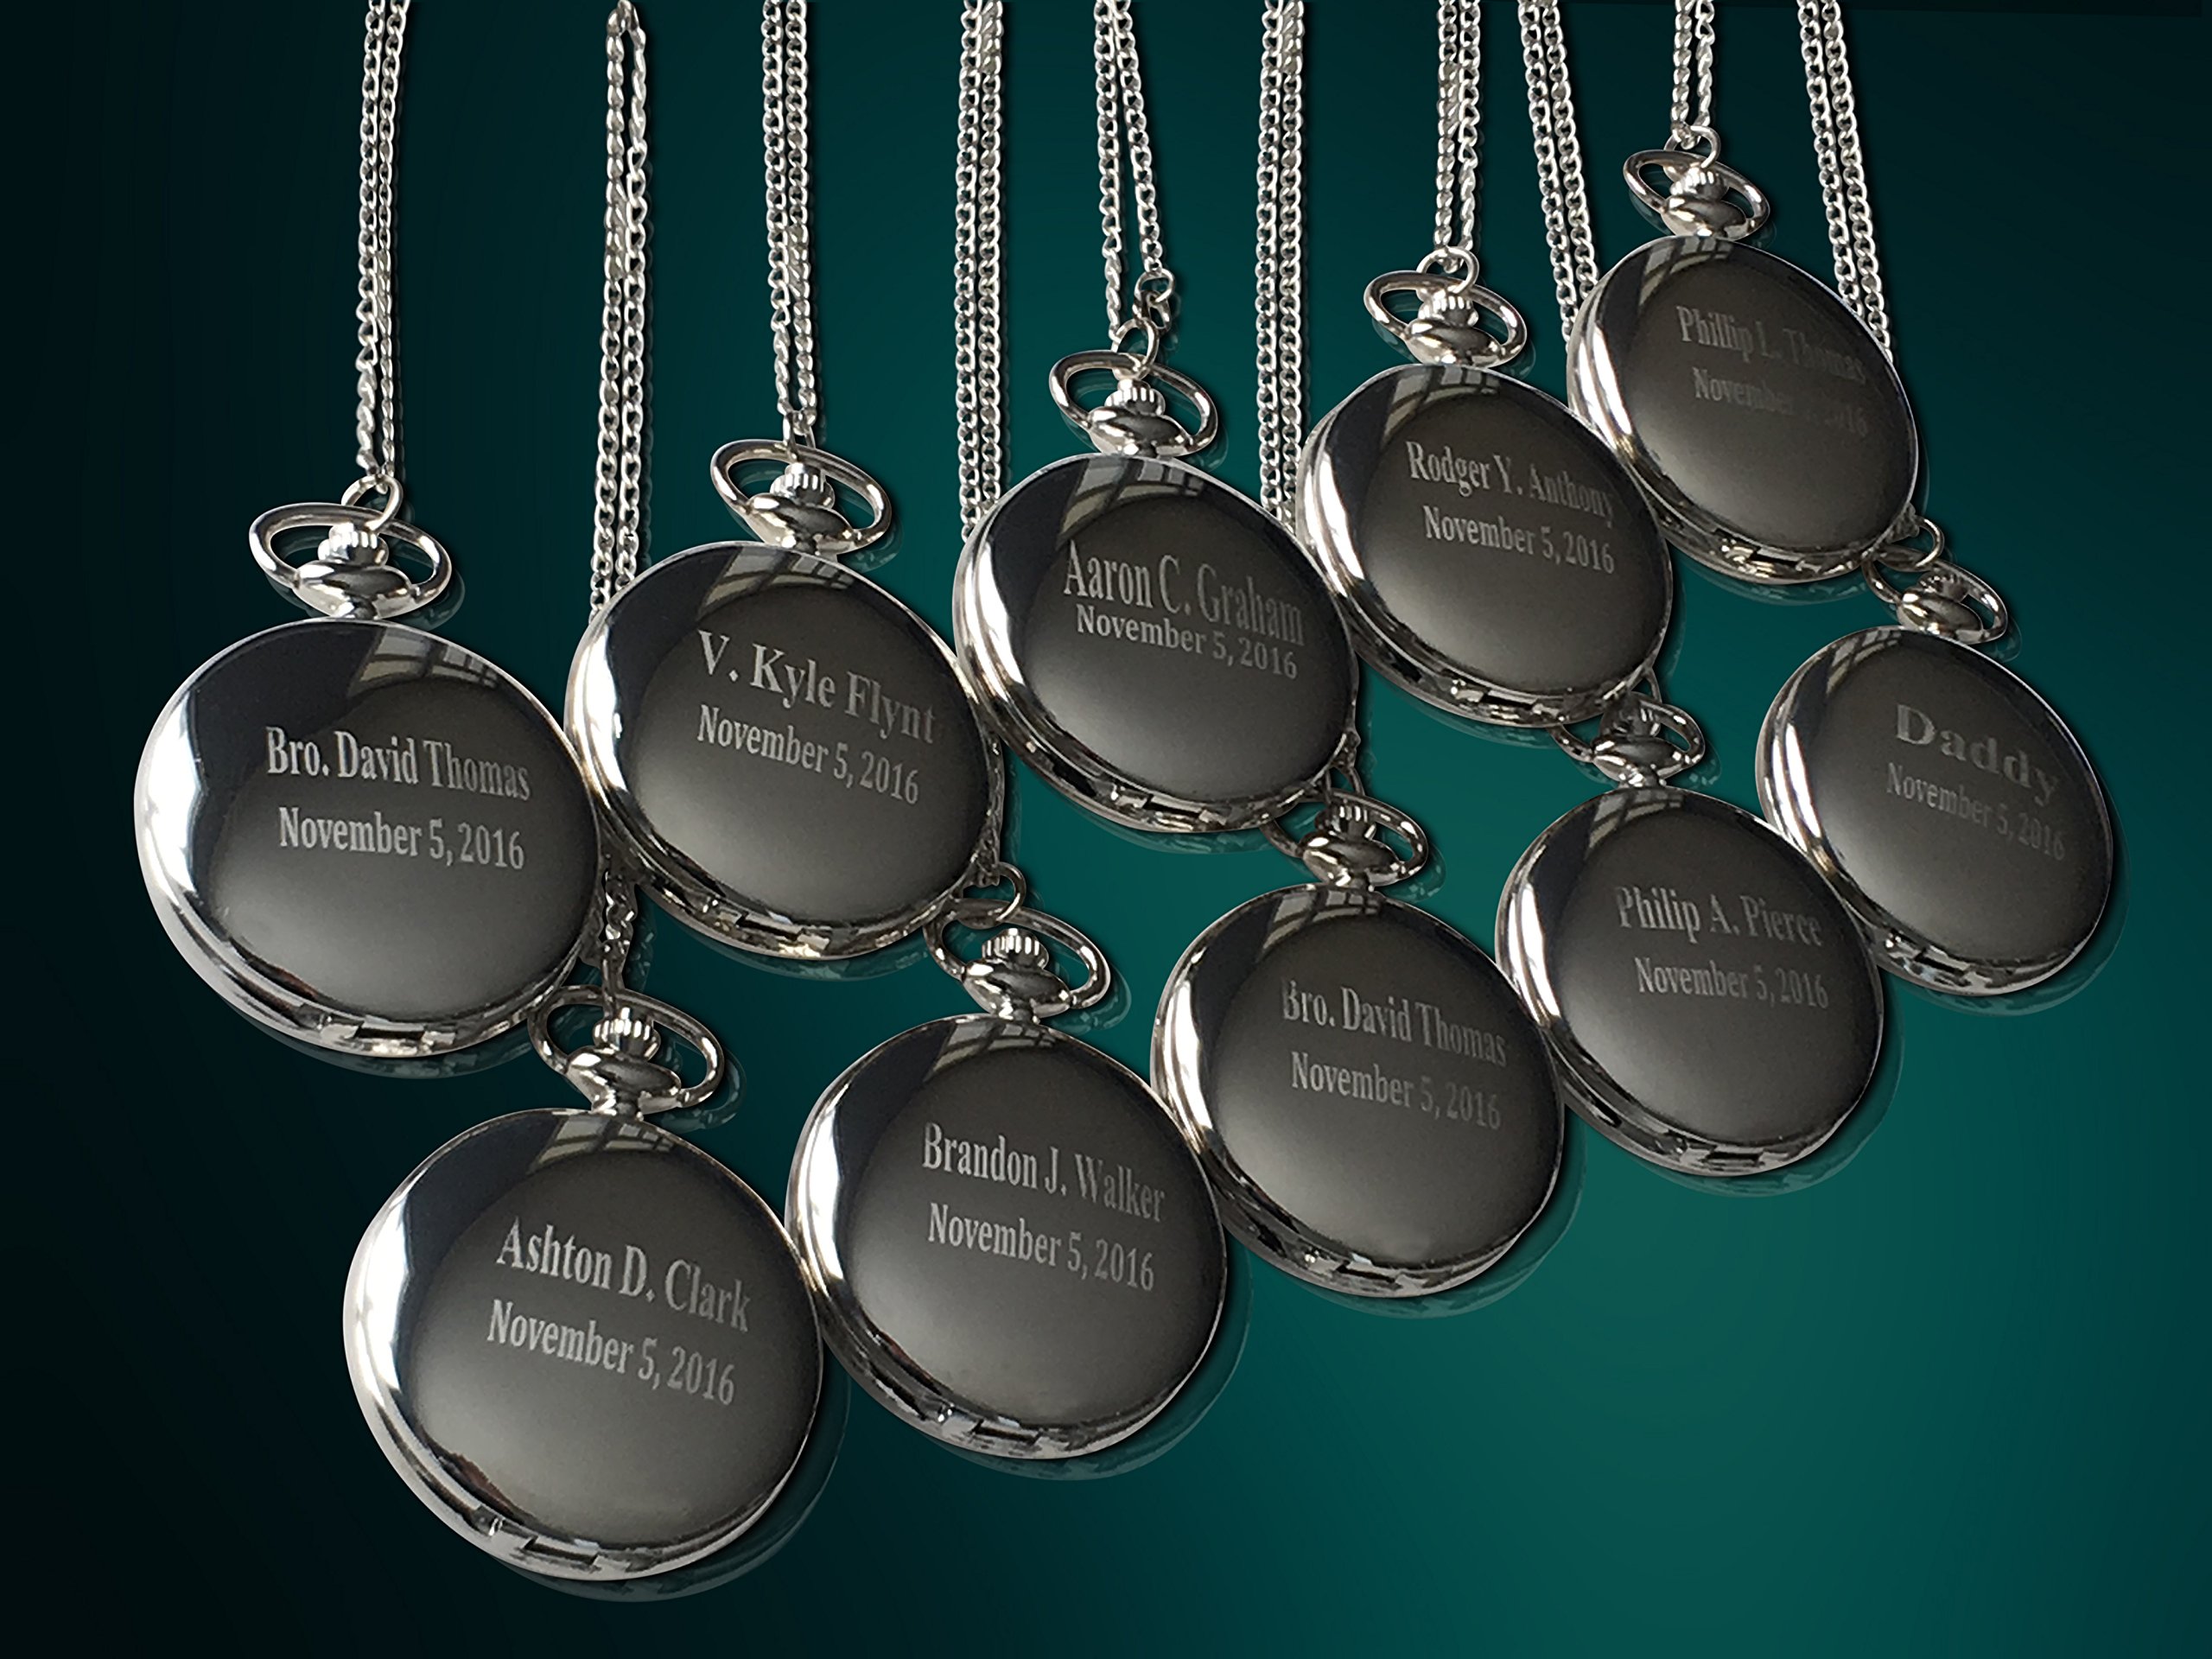 Personalized Pocket Watches, Set of 10 Groomsmen Wedding Unique Gifts, Chain, Box and Engraving Included, Comes in 4 Colors